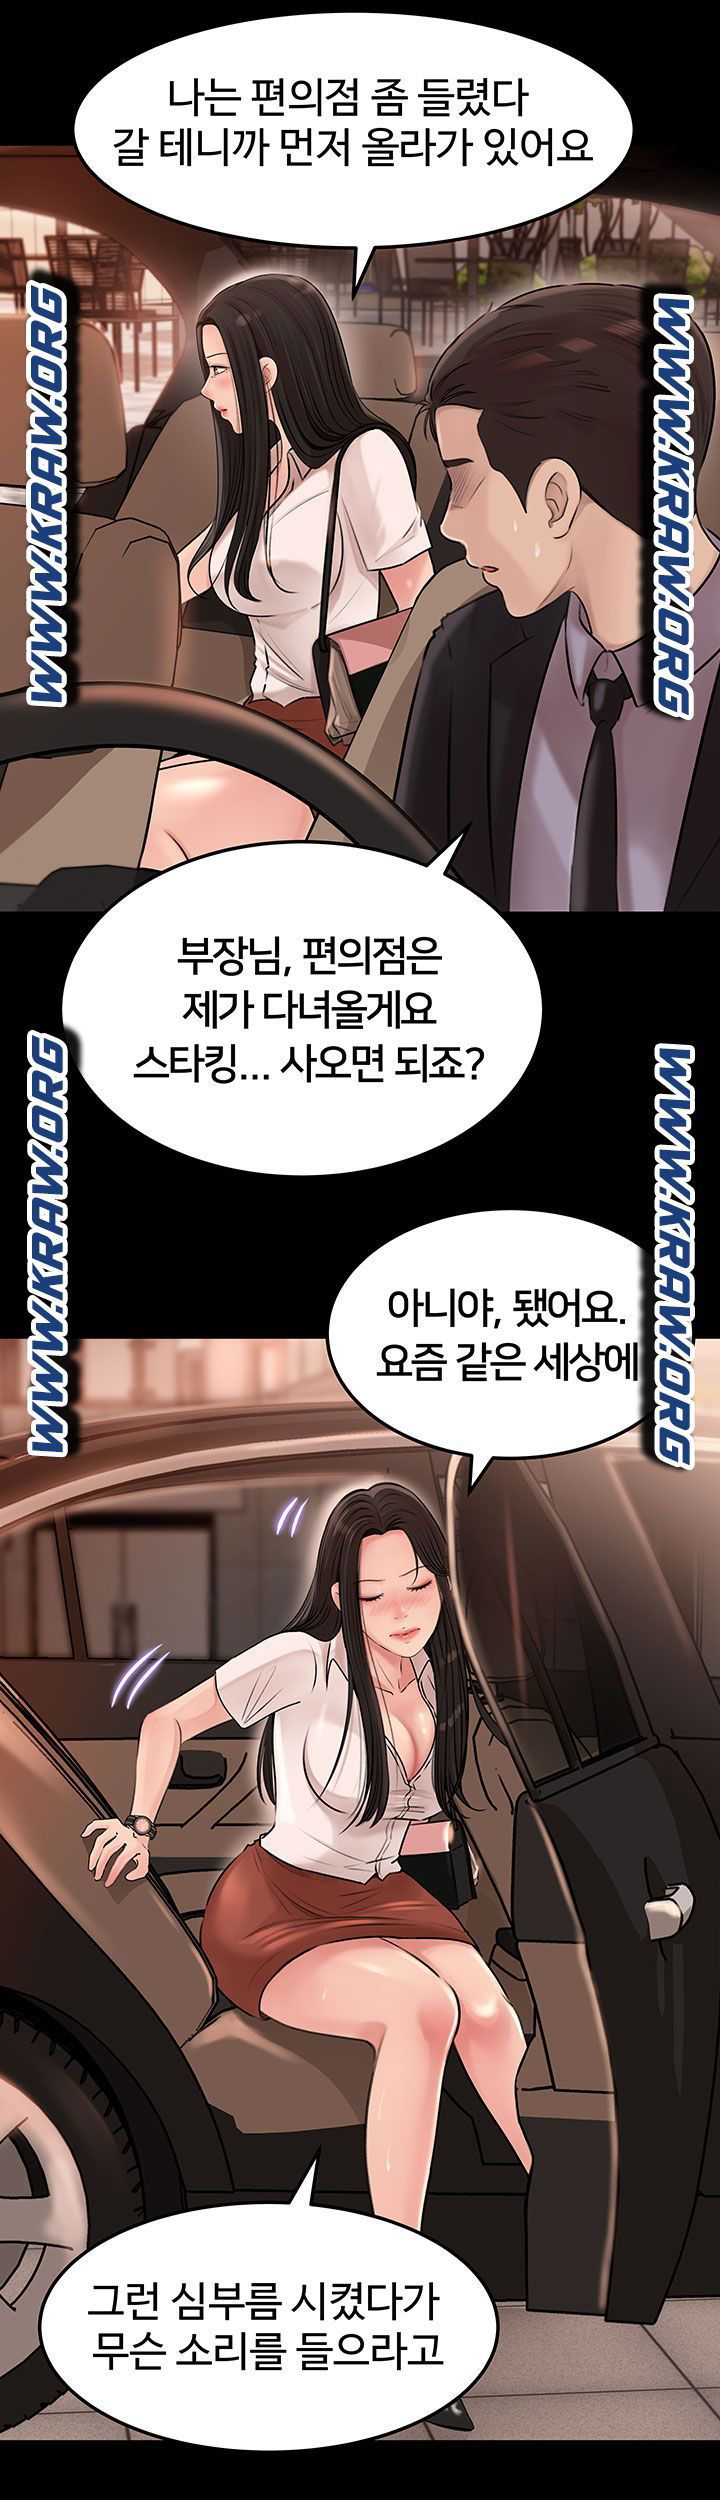 in-my-sister-in-law-raw-chap-4-15